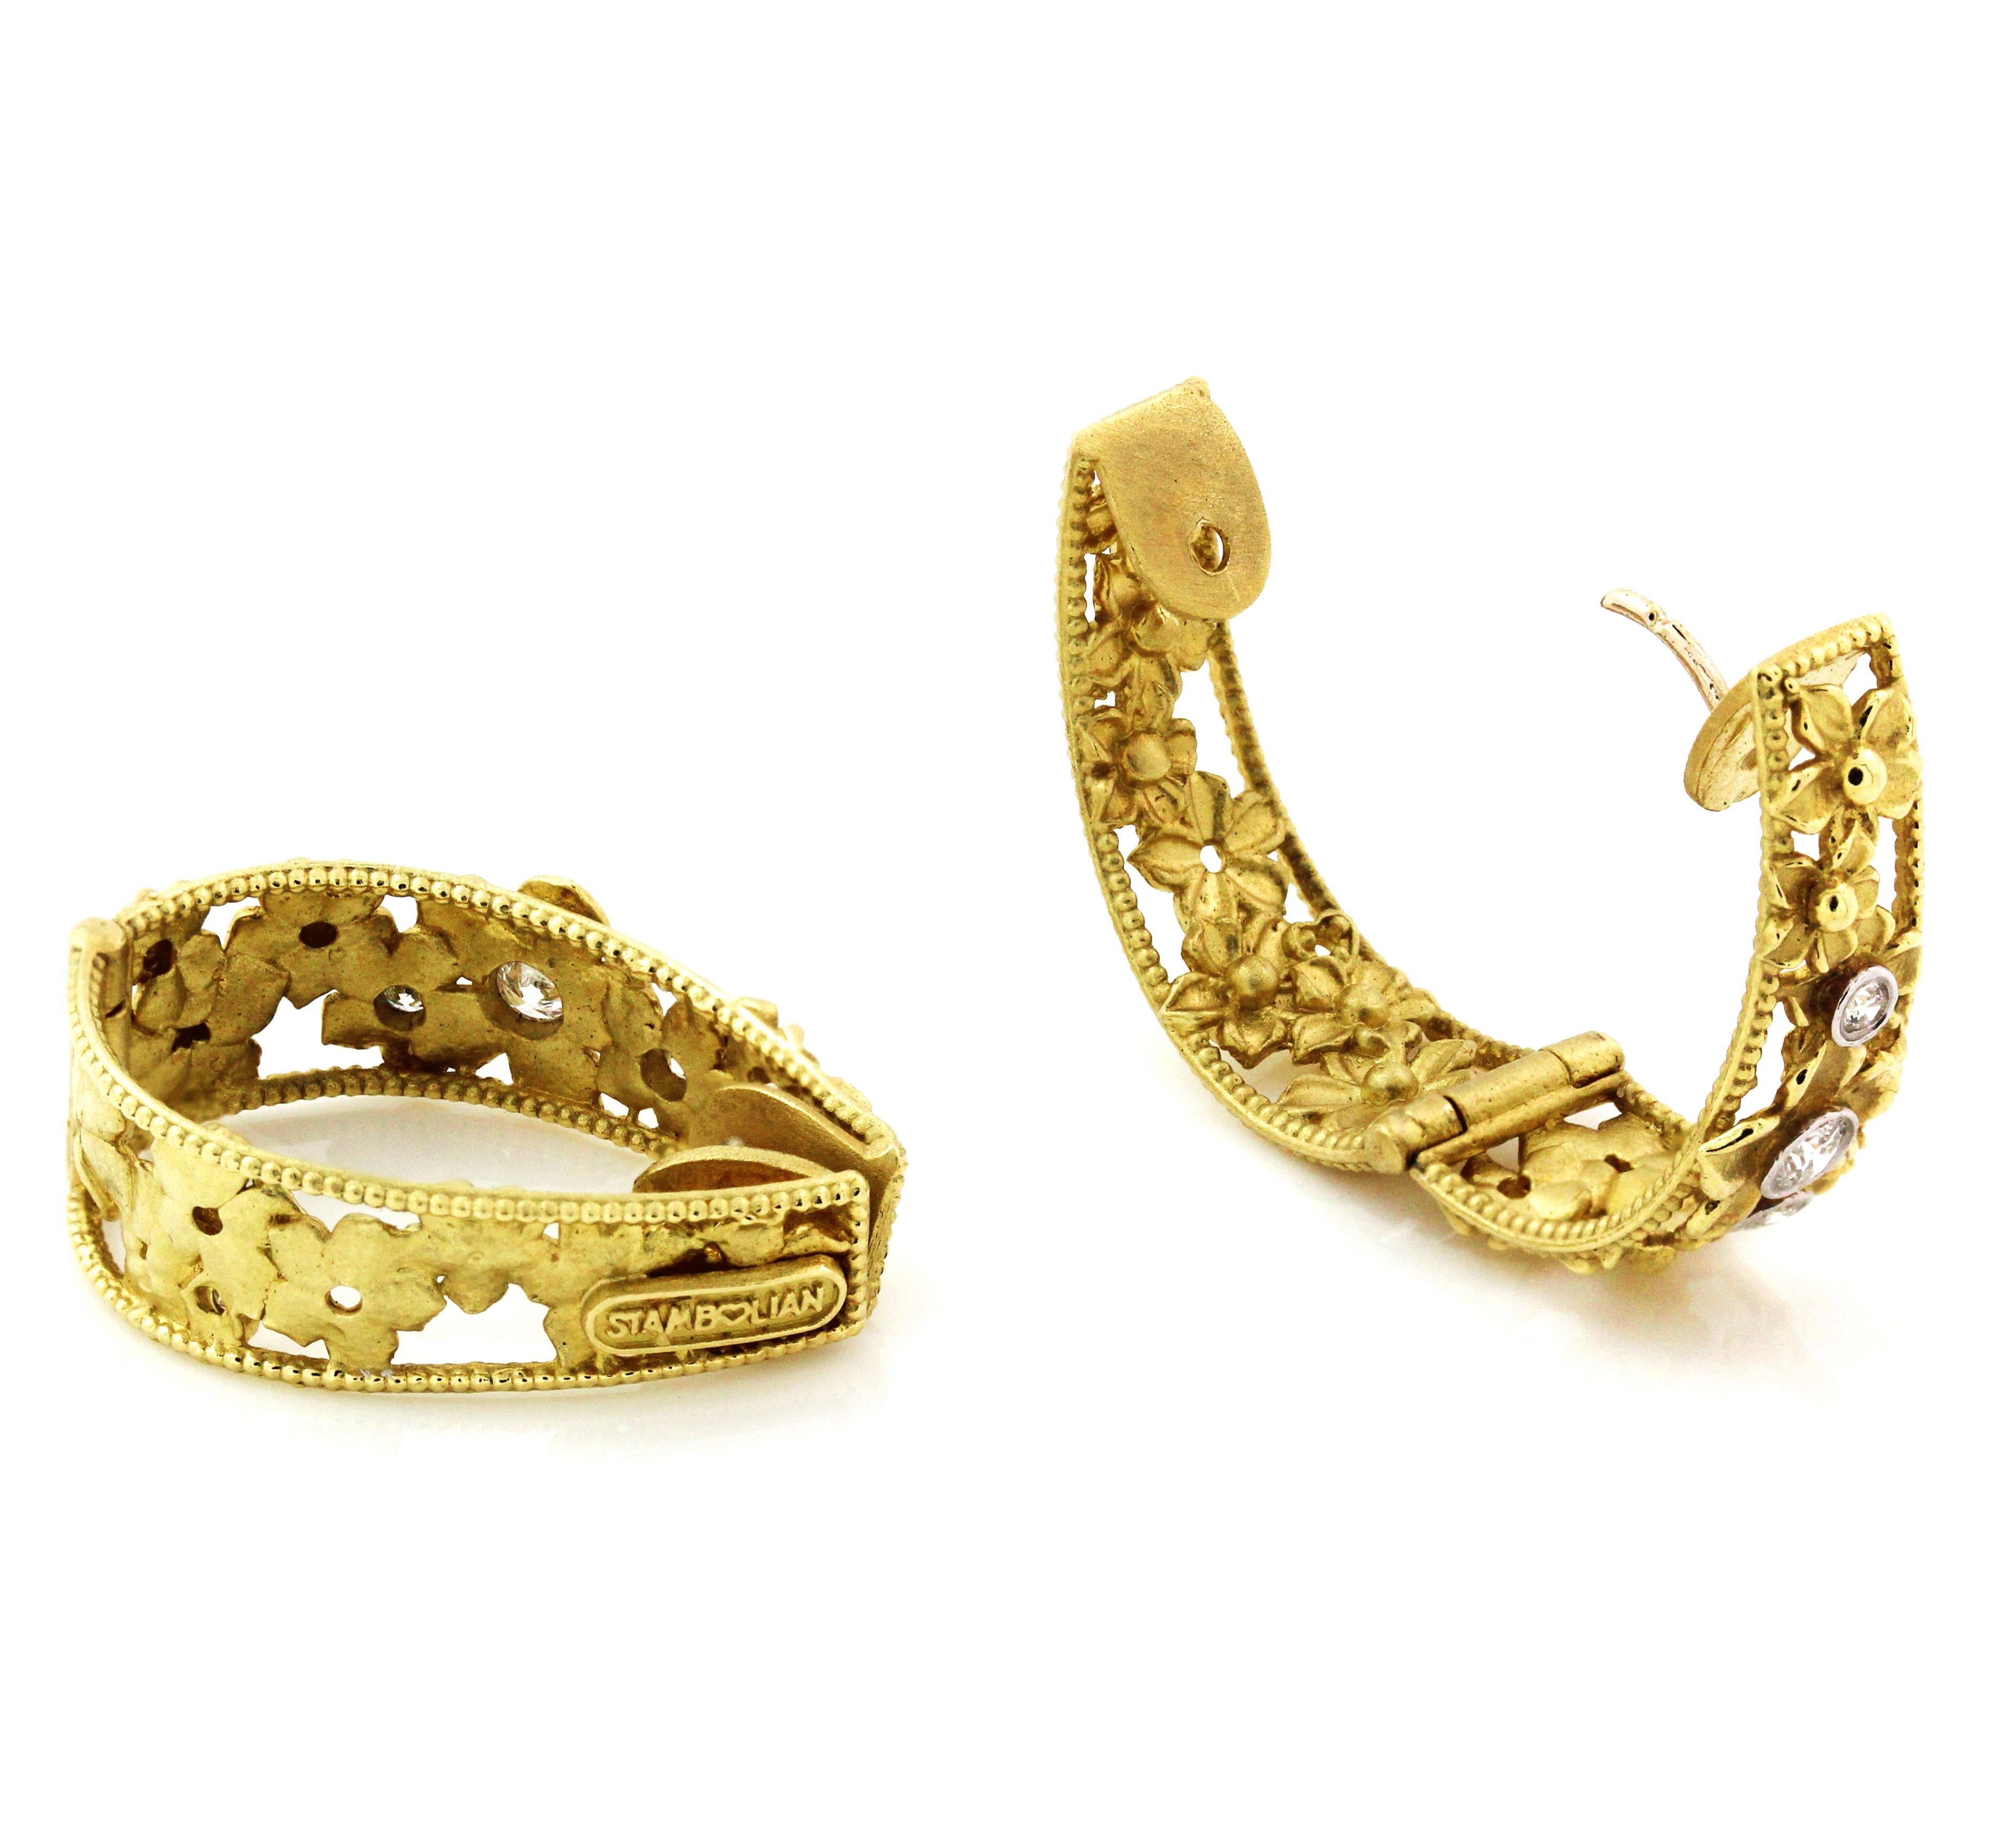 Stambolian 18K Yellow Gold and Diamond Inside-Out Floral Hoop Earrings 

These are inside-out earrings with diamonds set on face of earrings and floral design continuing on the interior.

0.34ct. G color, VS clarity diamonds. 6 total